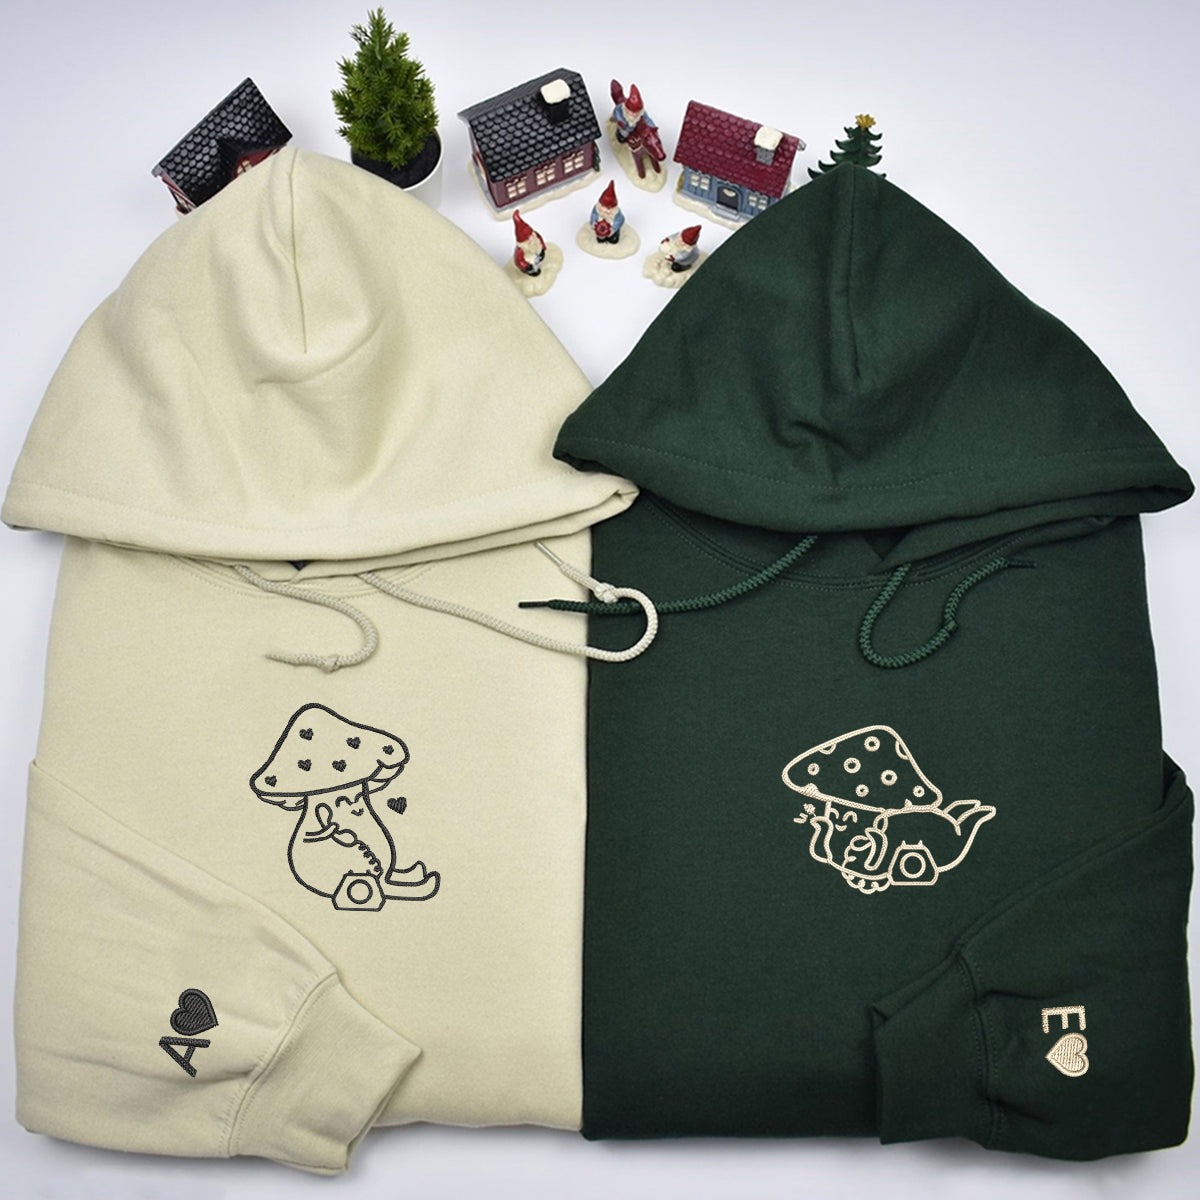 Custom Embroidered Late Night Mushroom Calls Matching Hoodies for Couples